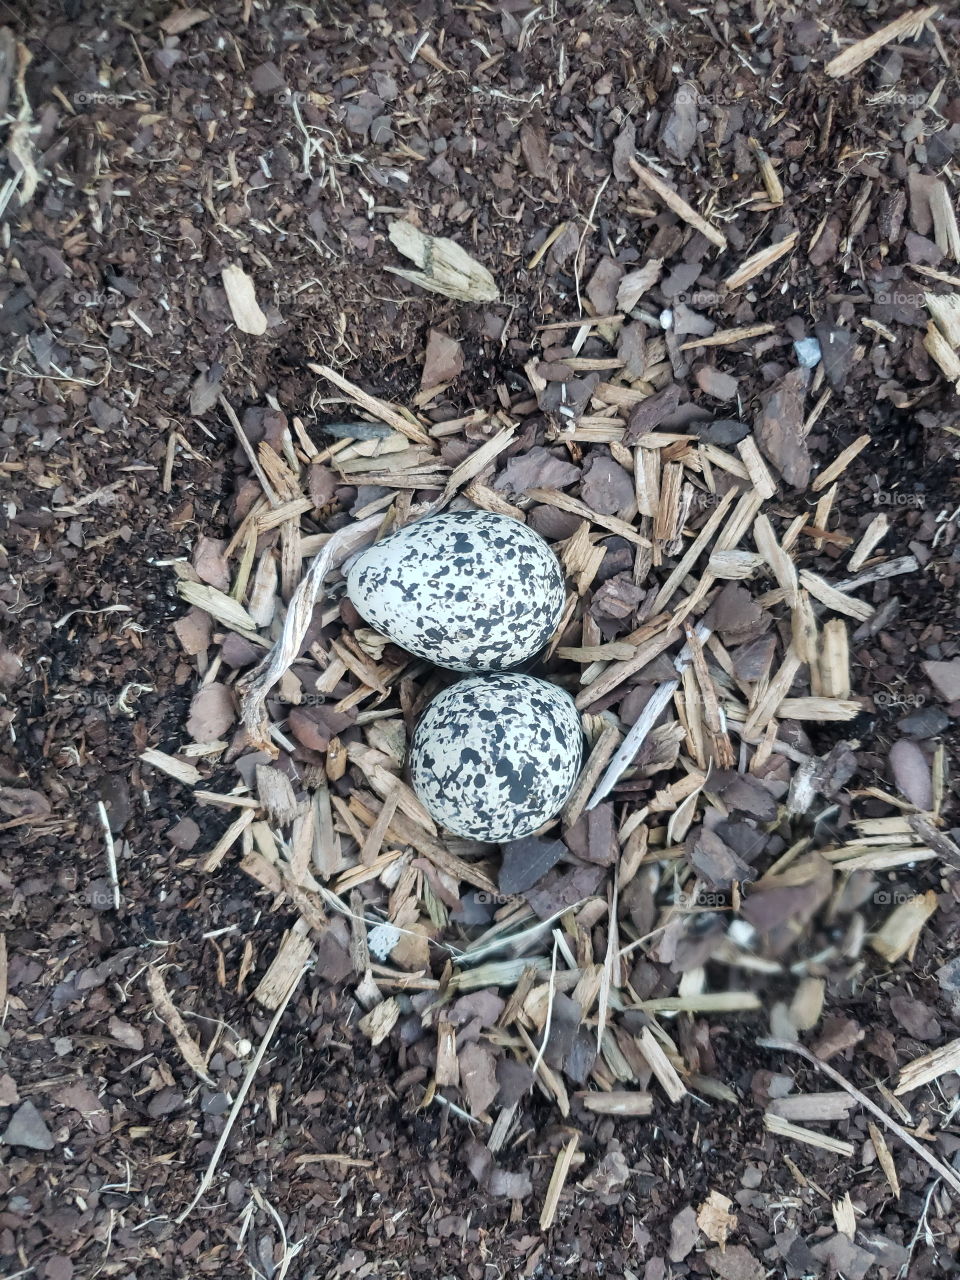 Killdeer bird has decided that my vegetable garden is a good place to lay her eggs this spring.